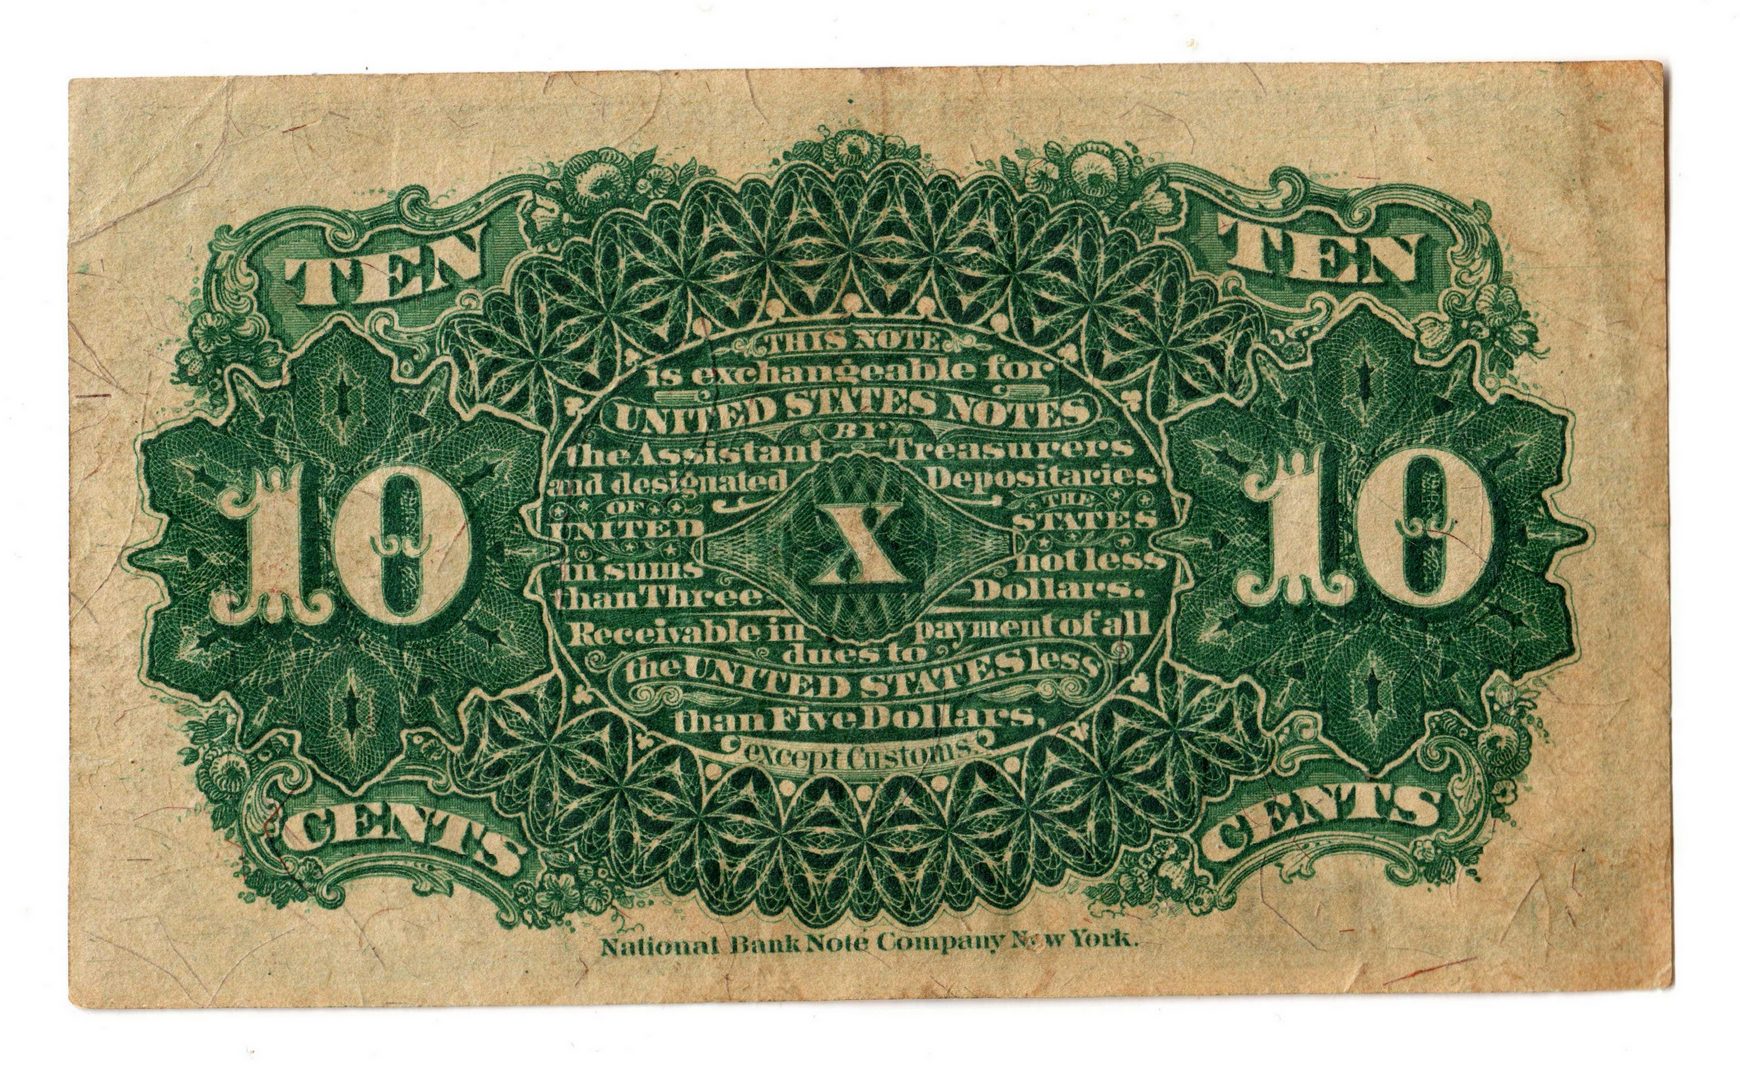 Lot 3: Group Of Seven 10 Cent U.S. Fractional Banknotes